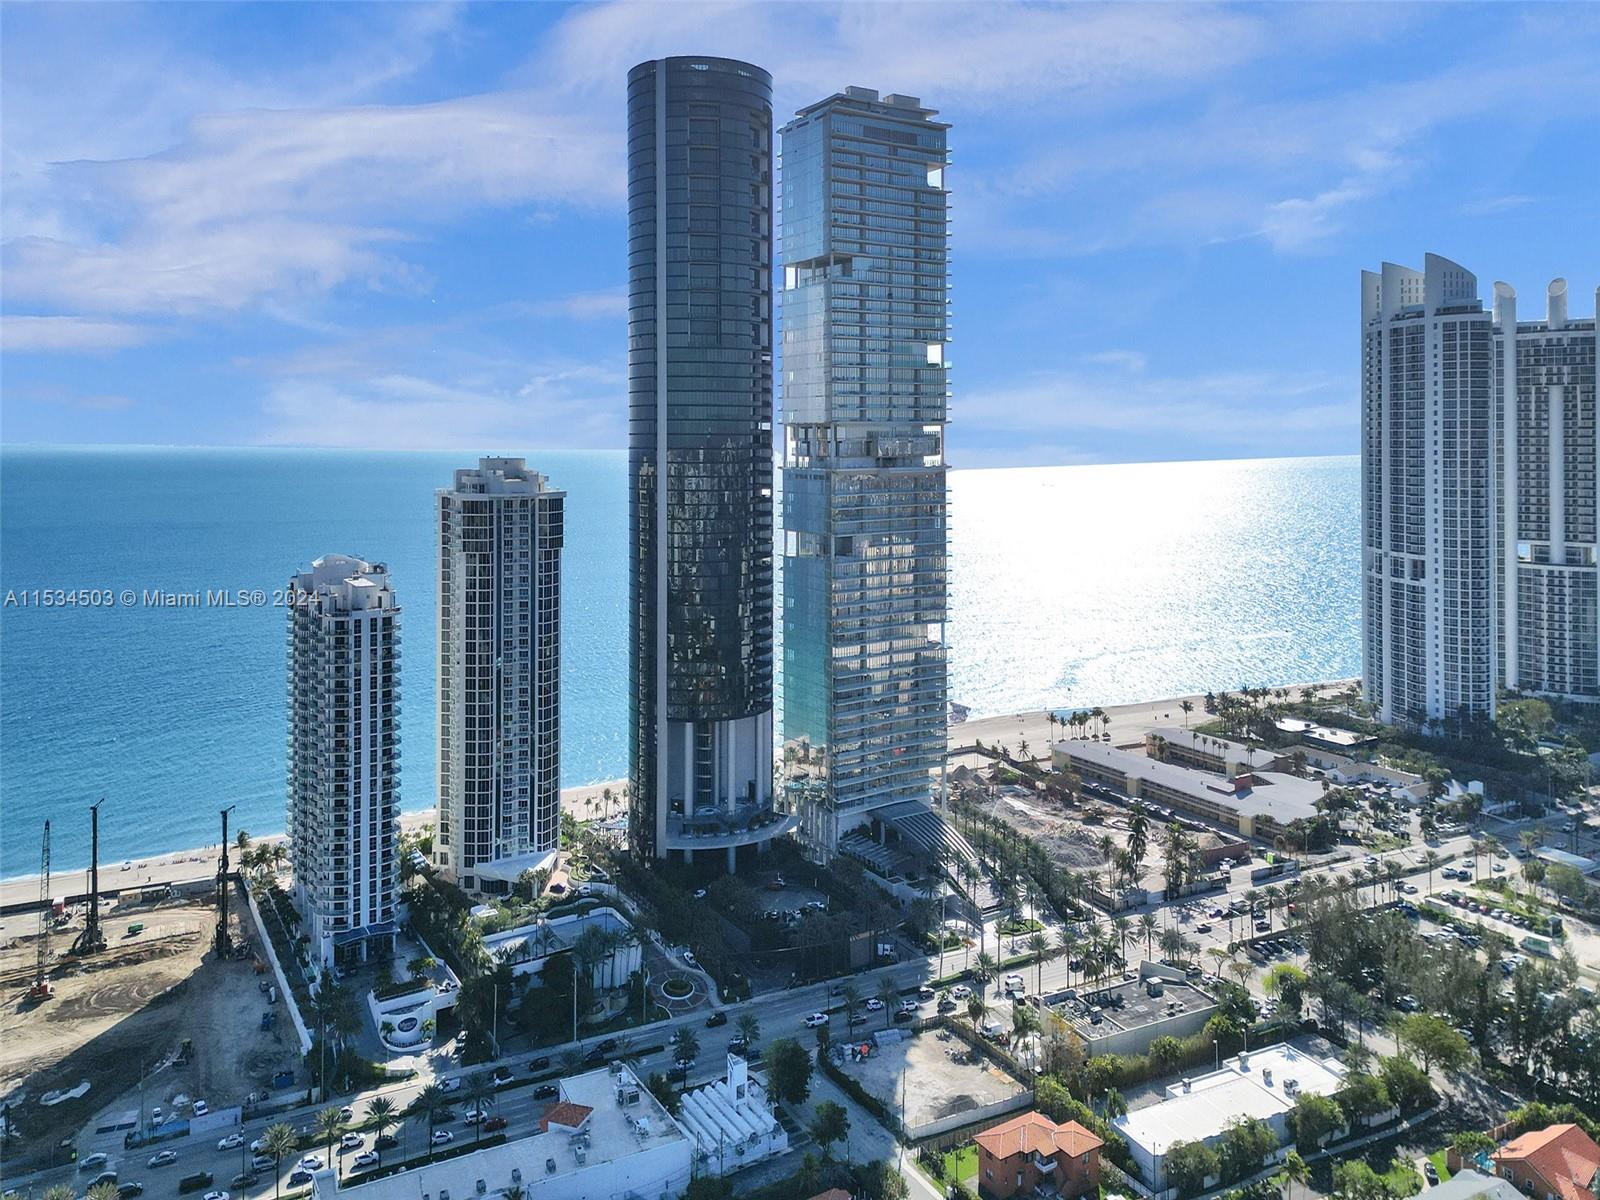 Welcome to your exclusive retreat at the prestigious Porsche Design Tower in Sunny Isles Beach. This opulent sanctuary offers unparalleled luxury and breathtaking vistas of the bay, Miami skyline, and stunning sunsets. Nestled within the iconic Porsche Tower, this exquisite residence epitomizes upscale living. 
This turnkey residence offers the ultimate in luxury living, with top-of-the-line amenities including a private pool, summer kitchen, and panoramic views from every room. 

Motivate seller bring your offer. 

This is an unfinished unit, allowing you to customize it to your personal taste and preferences.